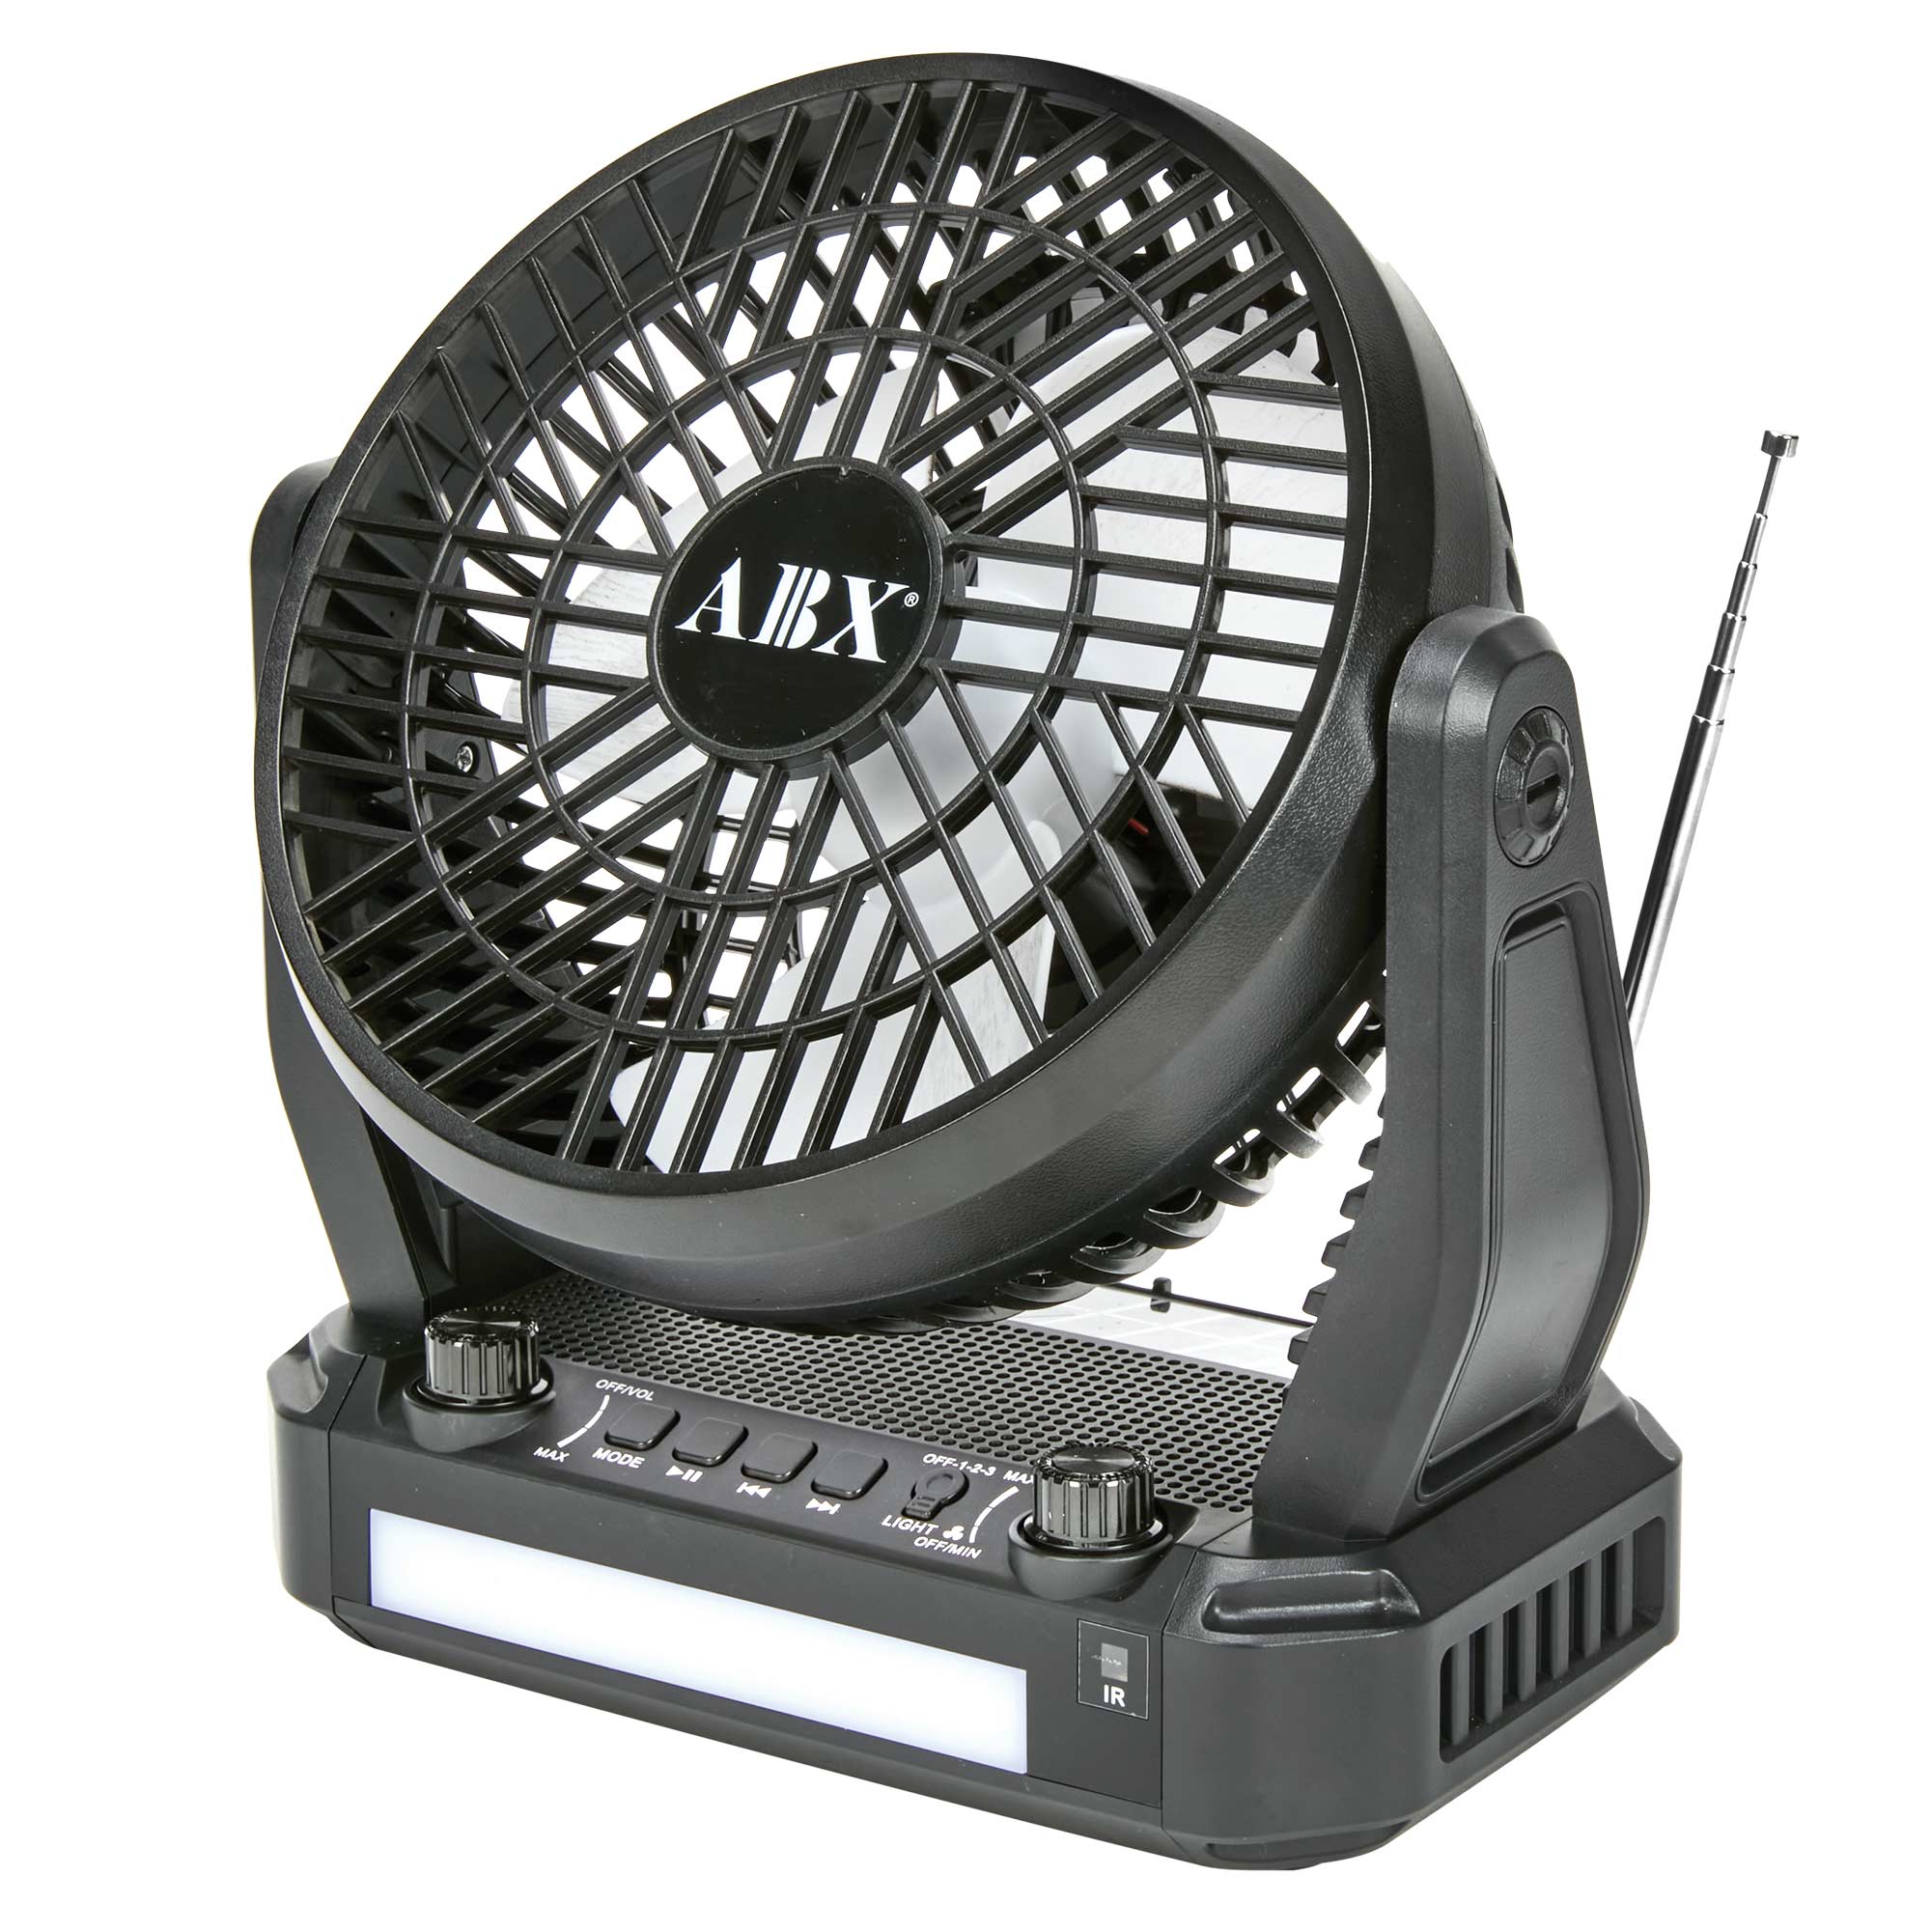 Portable 6" Solar Fan with Radio, Bluetooth, Dimmable LED Lights & More!